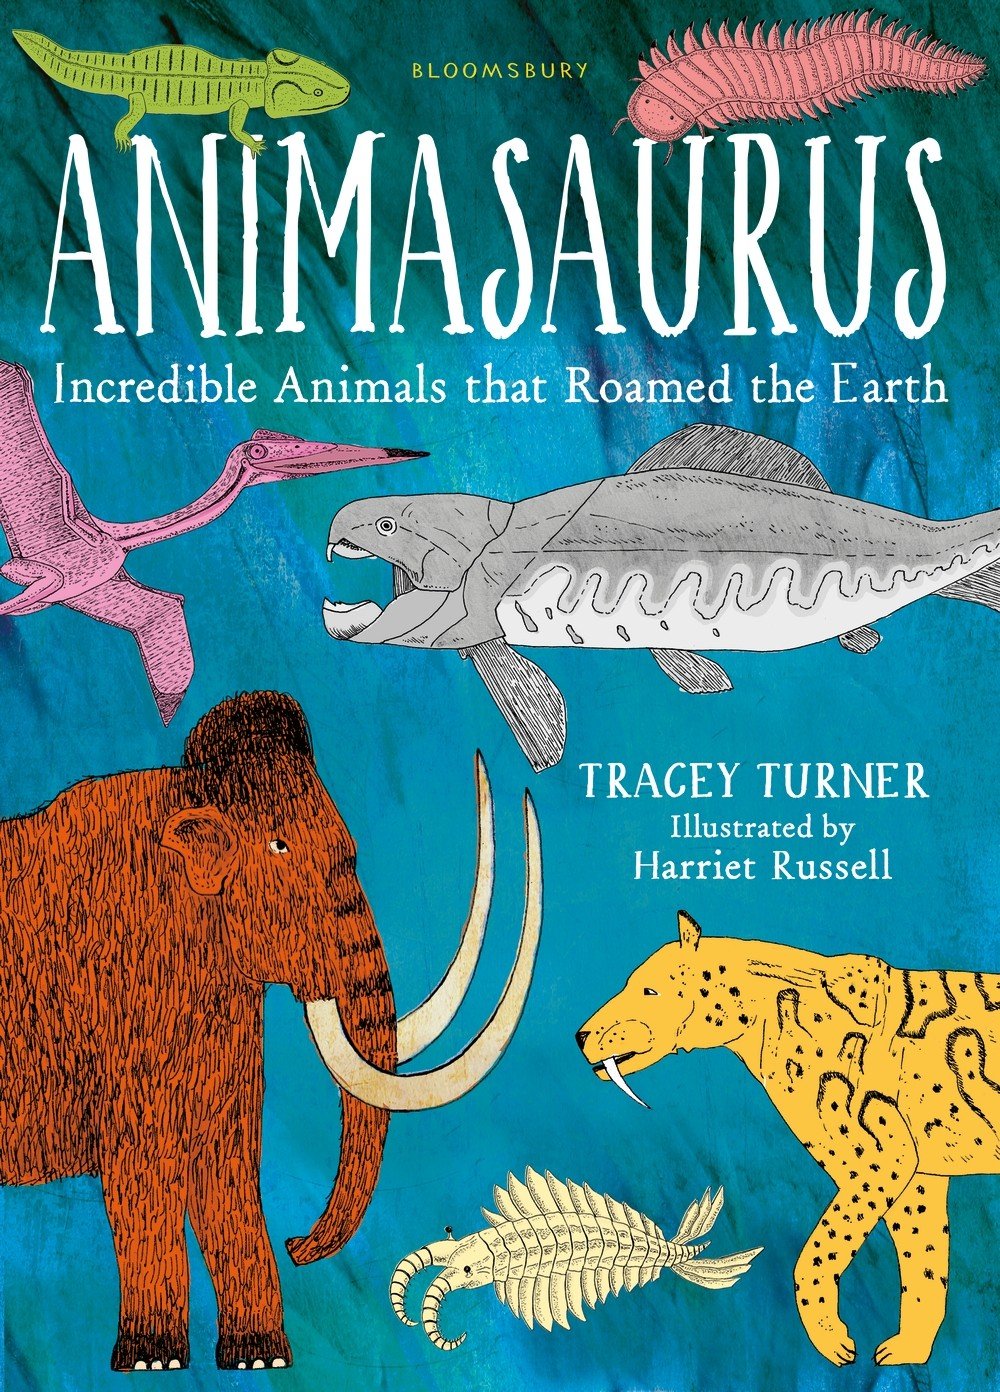 Animasaurus - Incredible Animals that Roamed the Earth